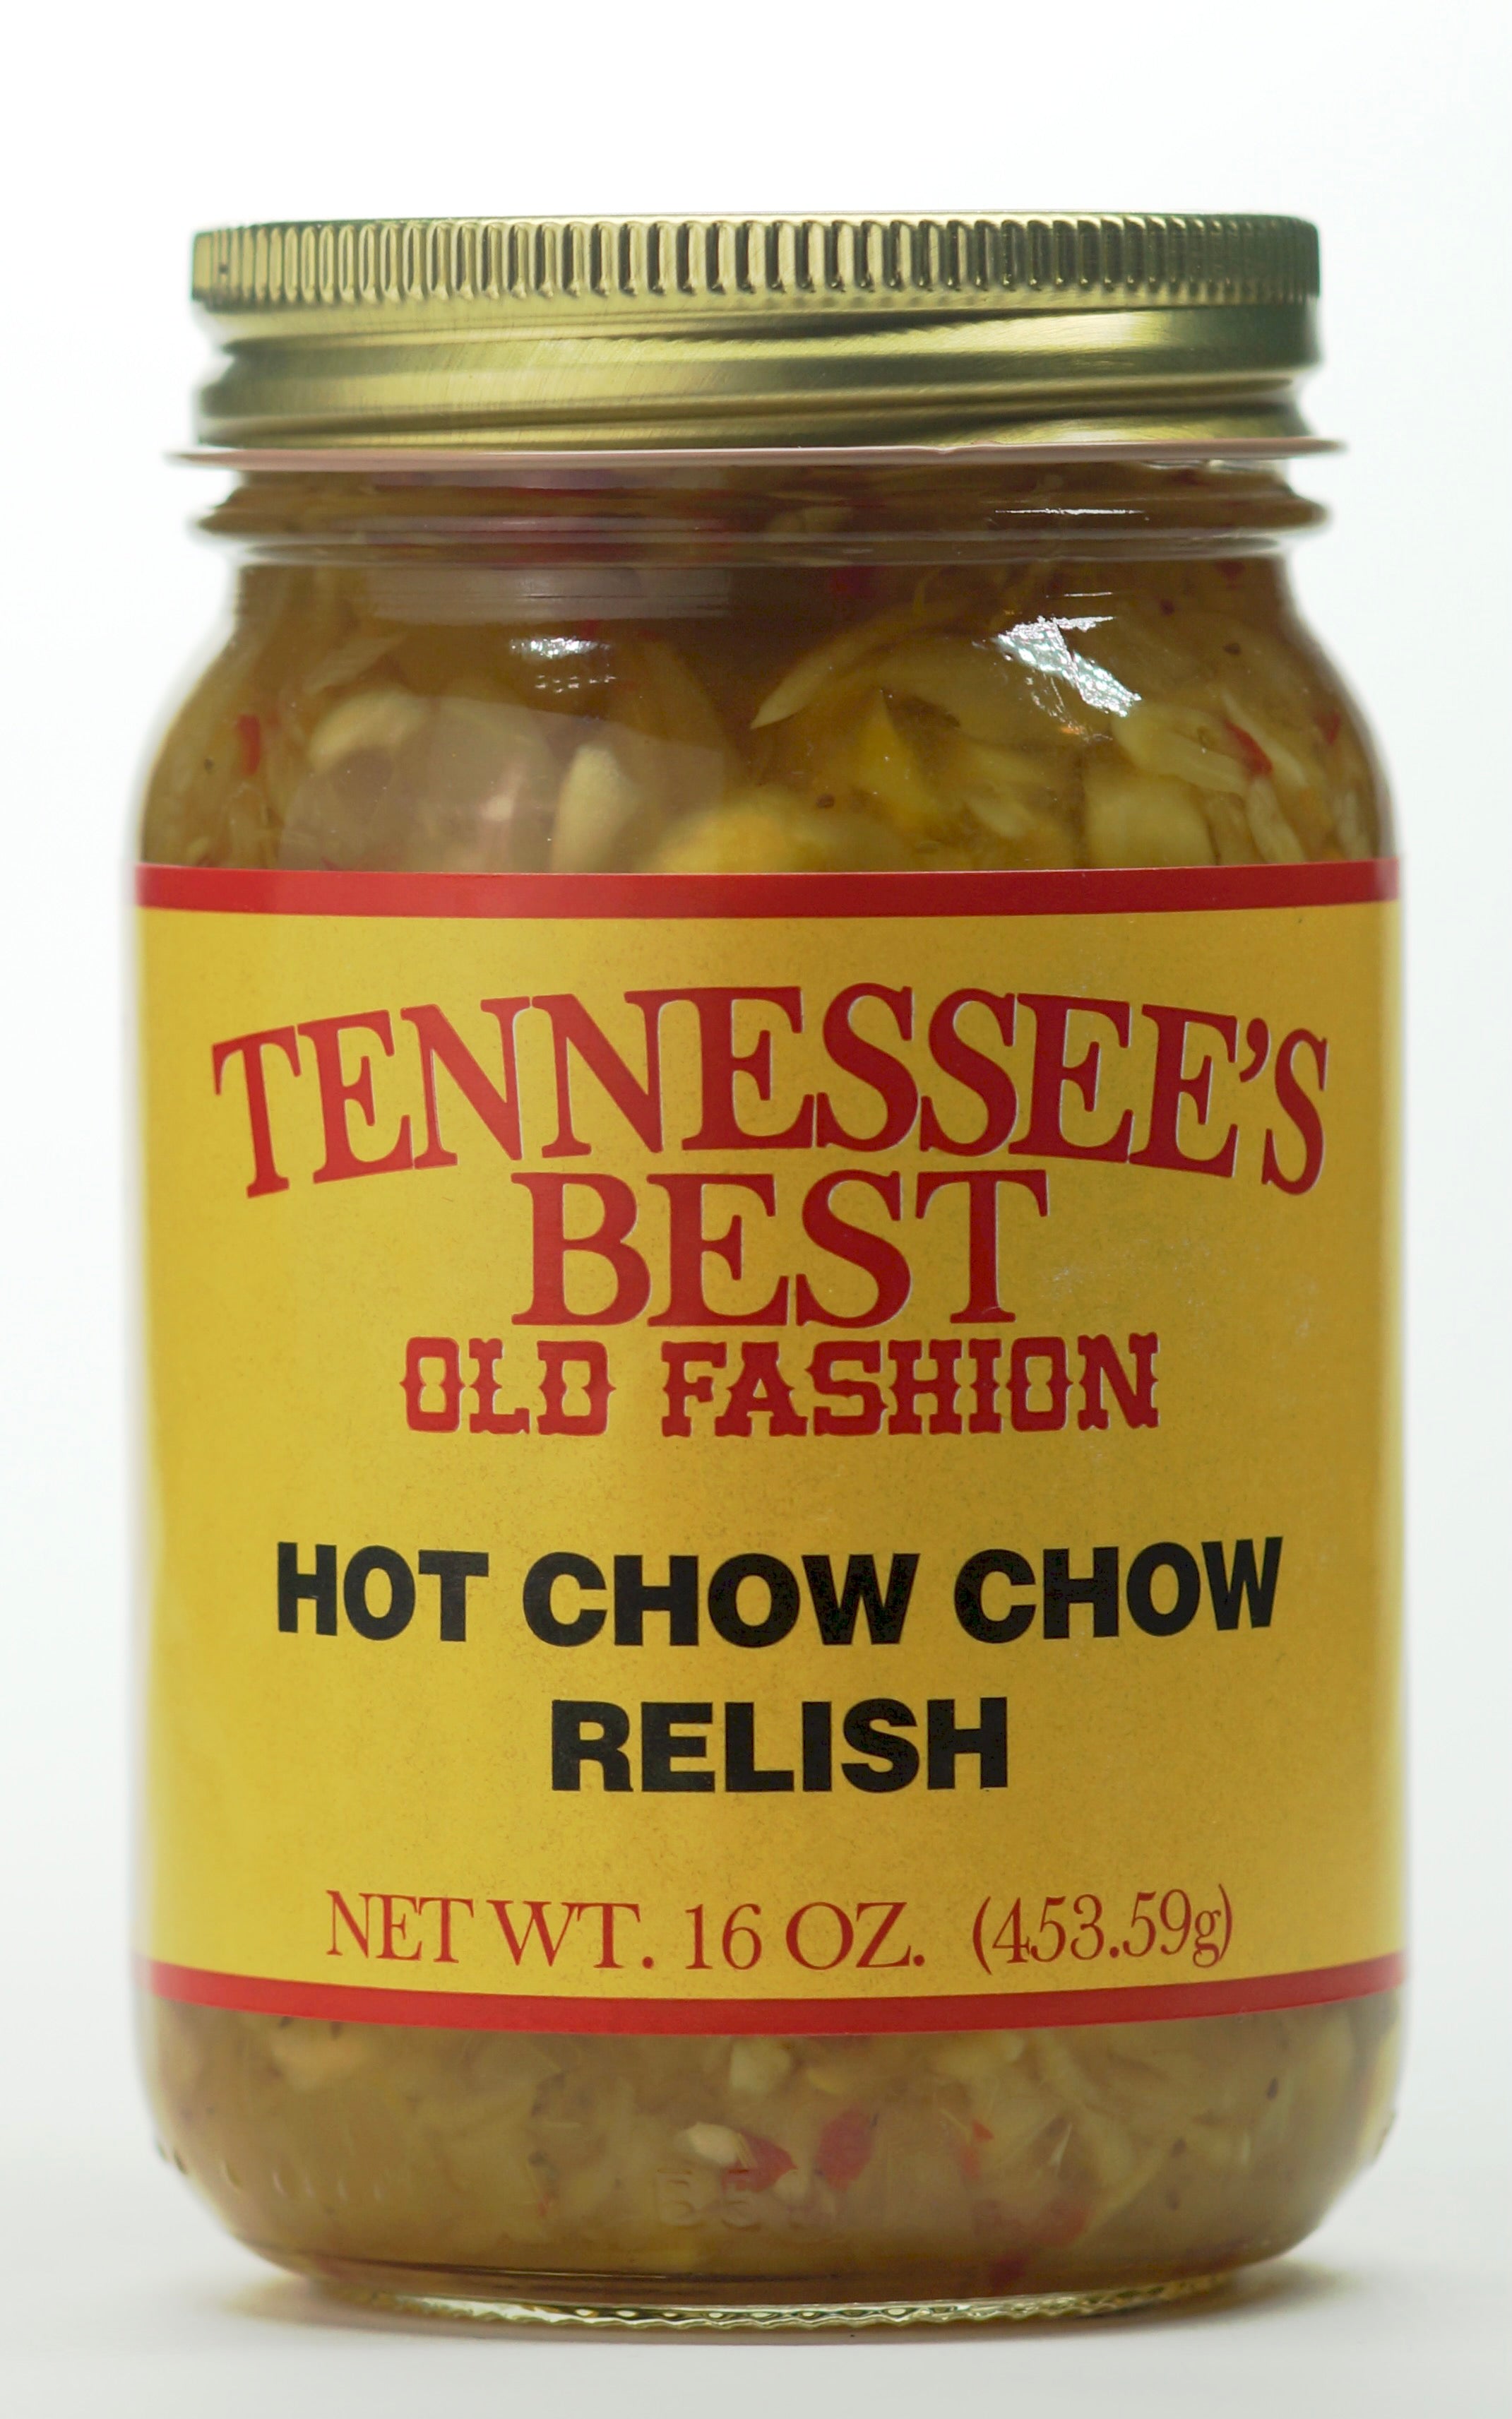 Tennessee's Best Old Fashion Style Chow Chow Relish